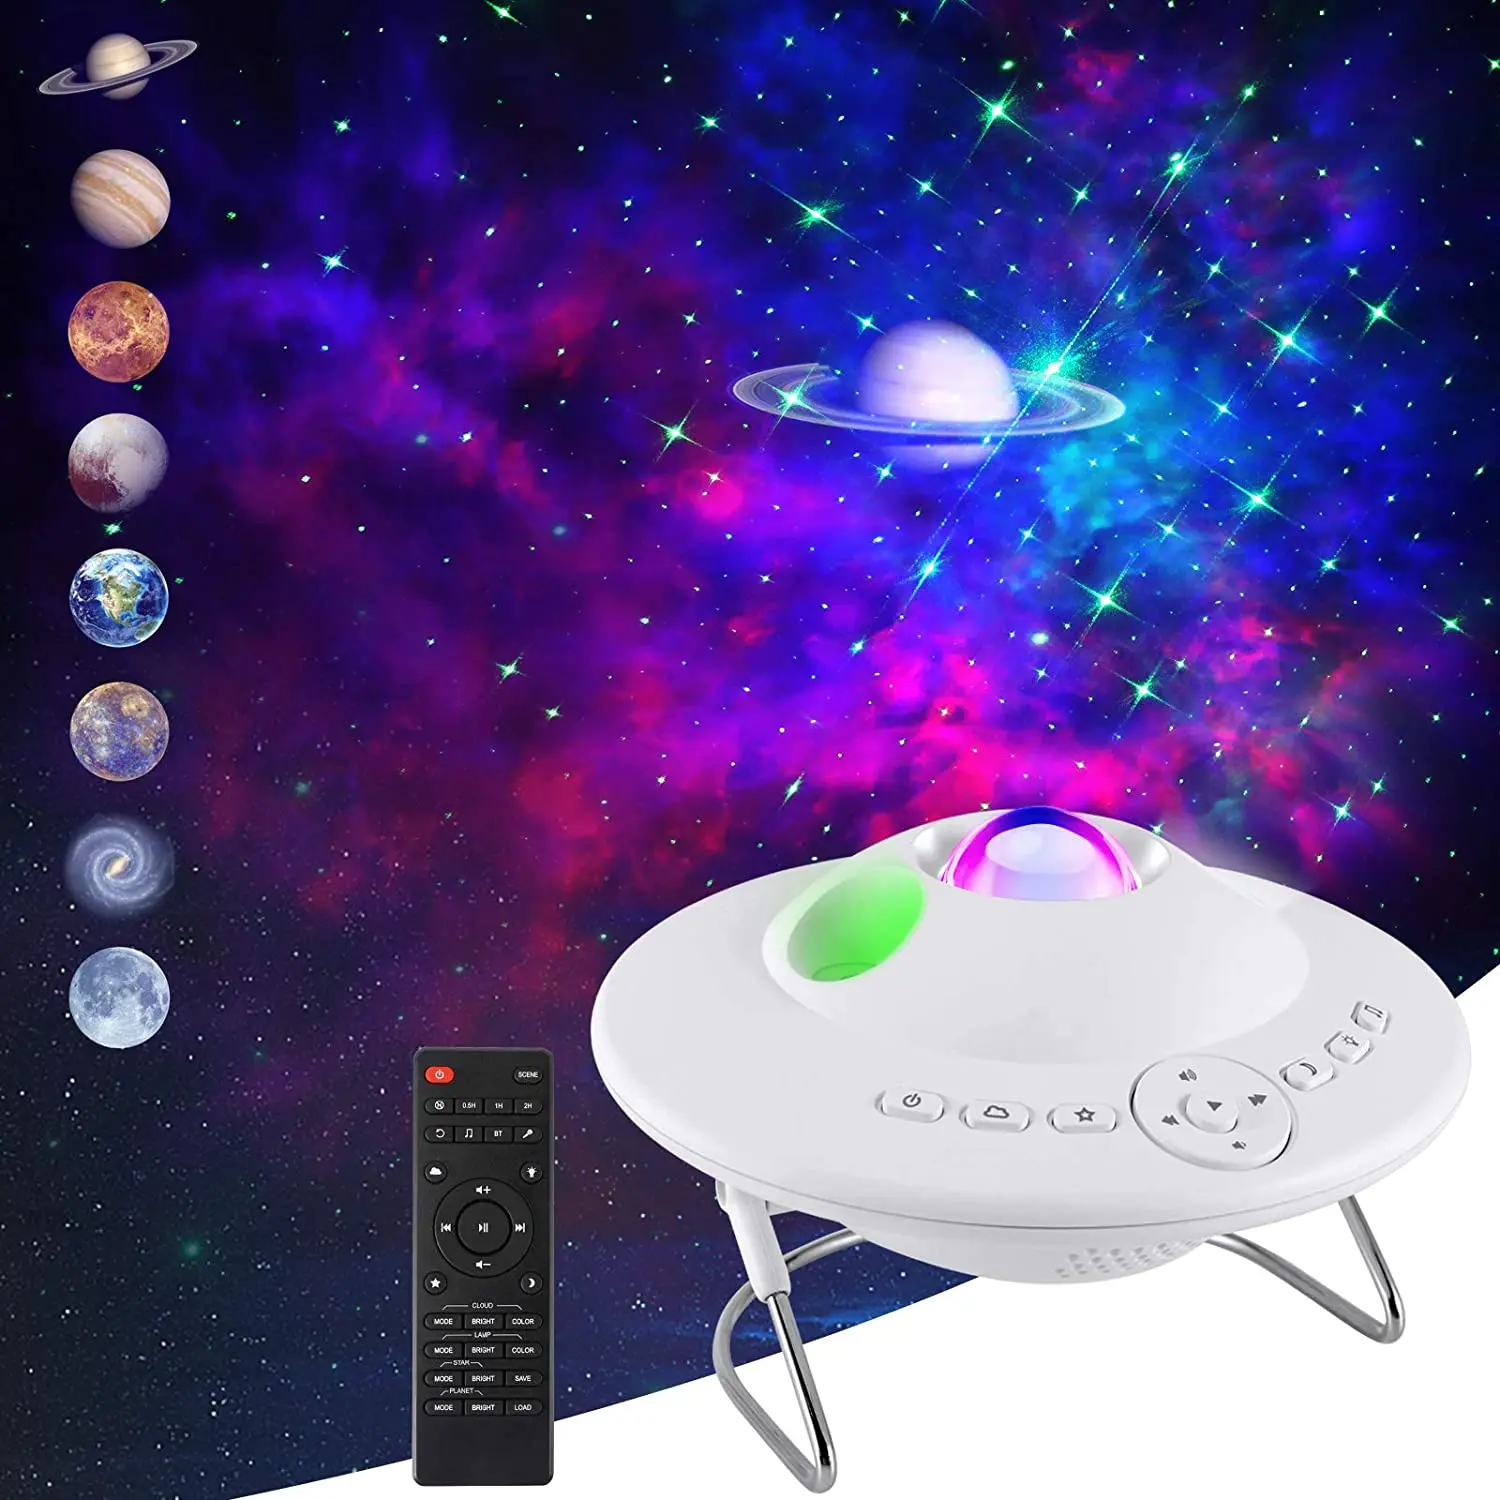 Galaxy Projector Ufo Shape 8 Planetary Led Star Projector Decoration Gaming Room Bedroom Night Light Starry Sky Laser Lamp Gift